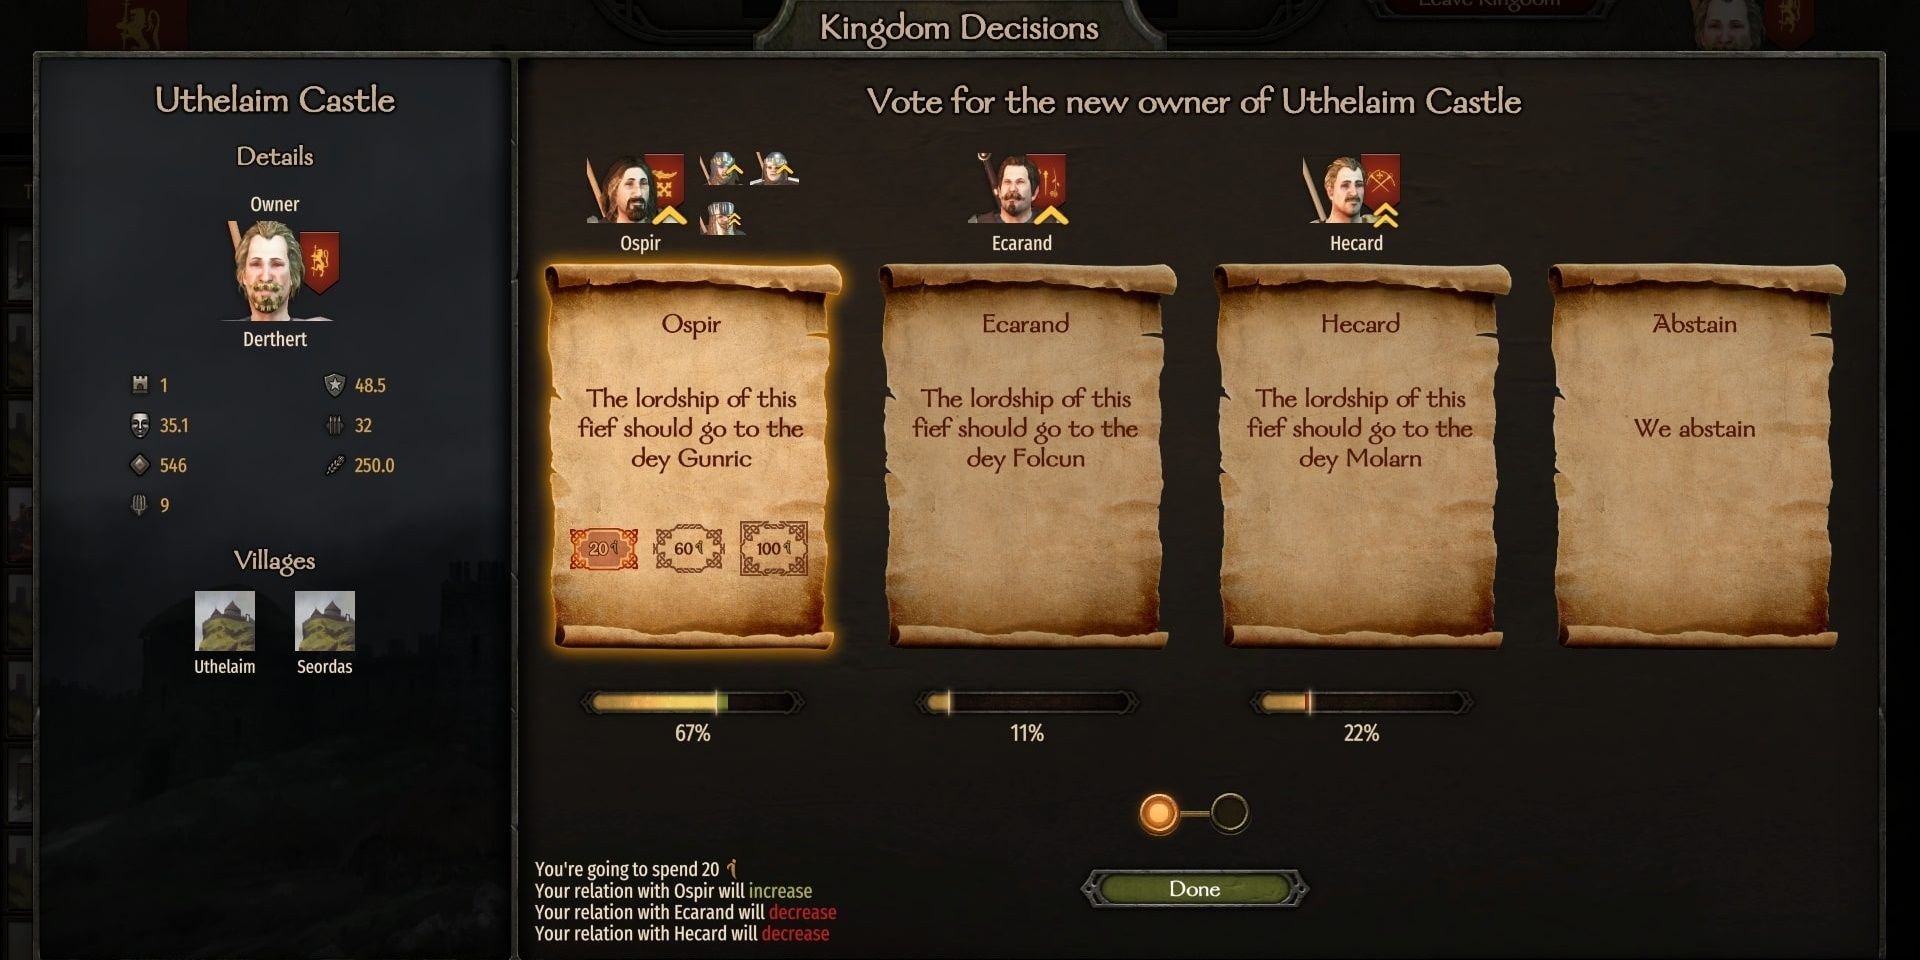 Mount & Blade 2: Bannerlord Voting For A Kingdom Decision